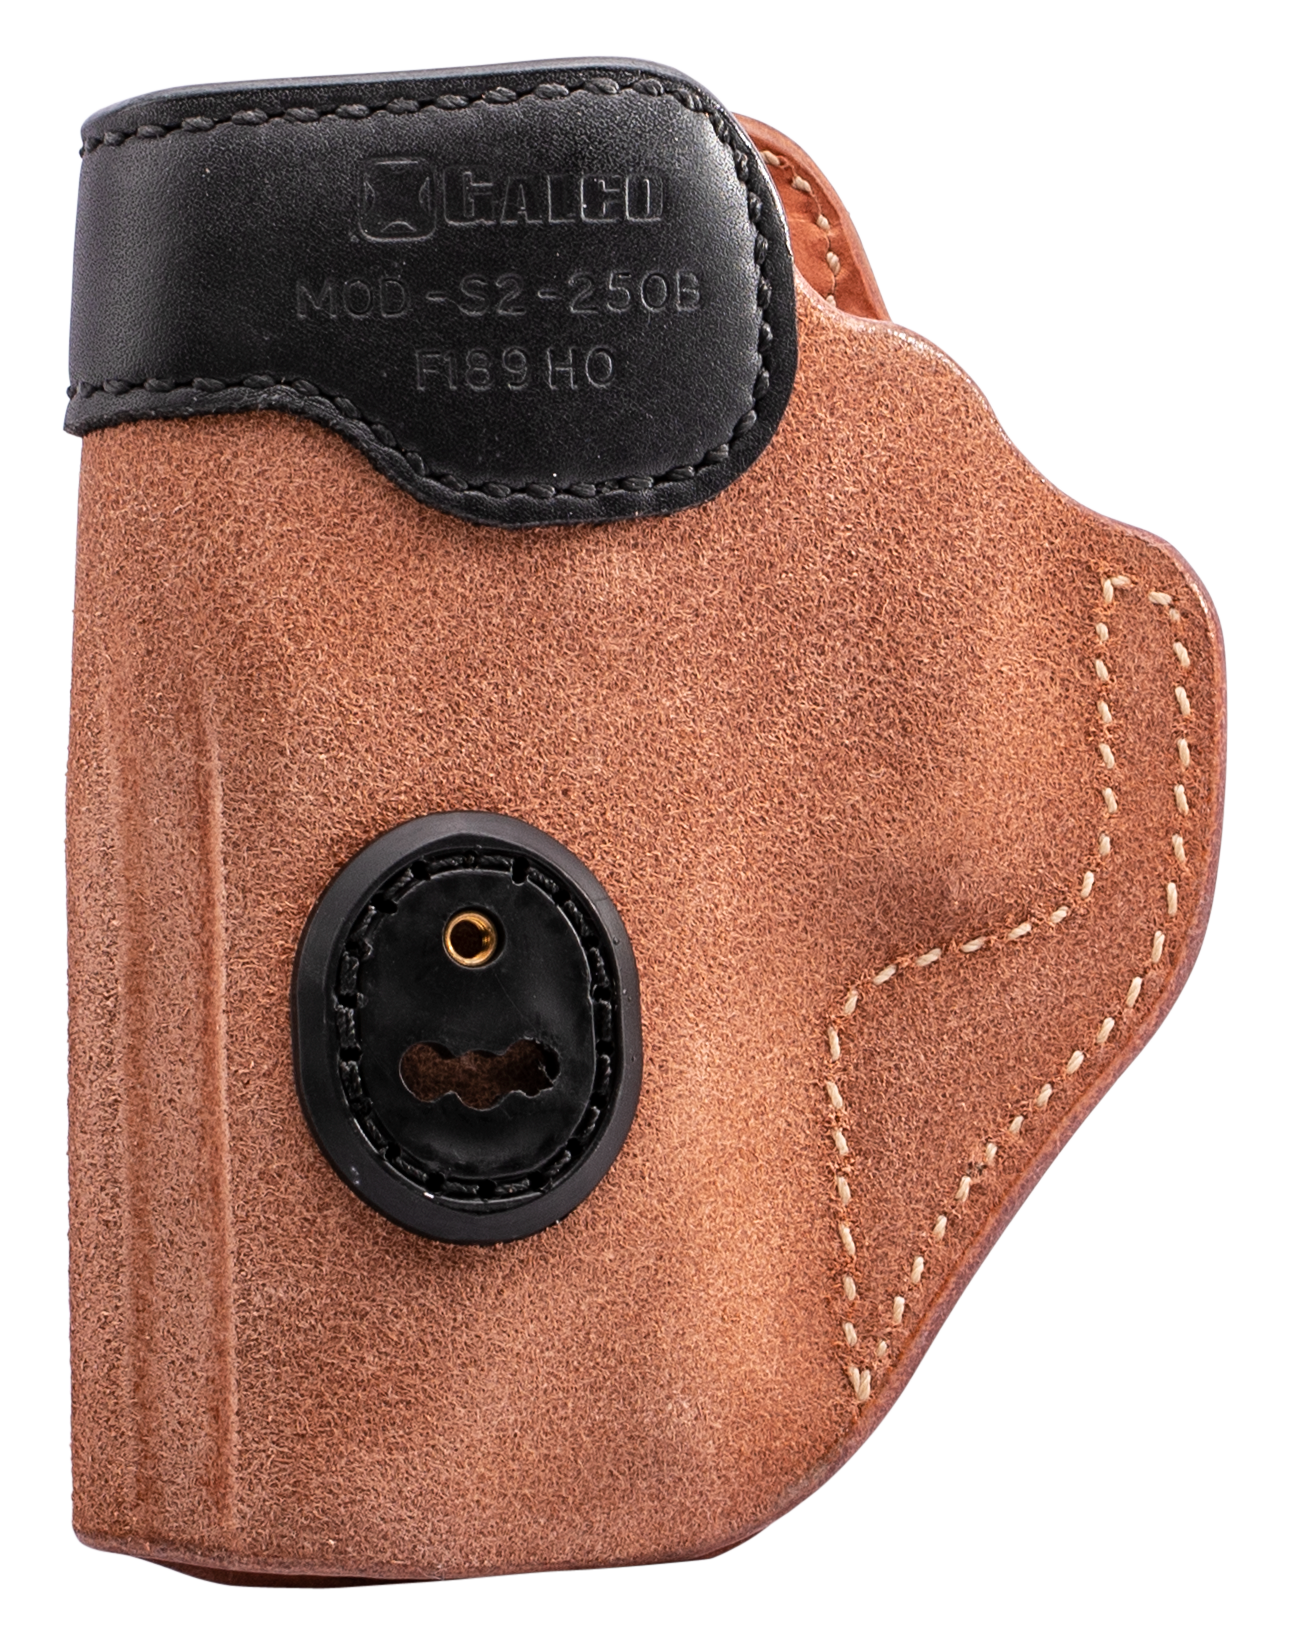 Galco Scout 3.0 IWB Holster - SIG P229